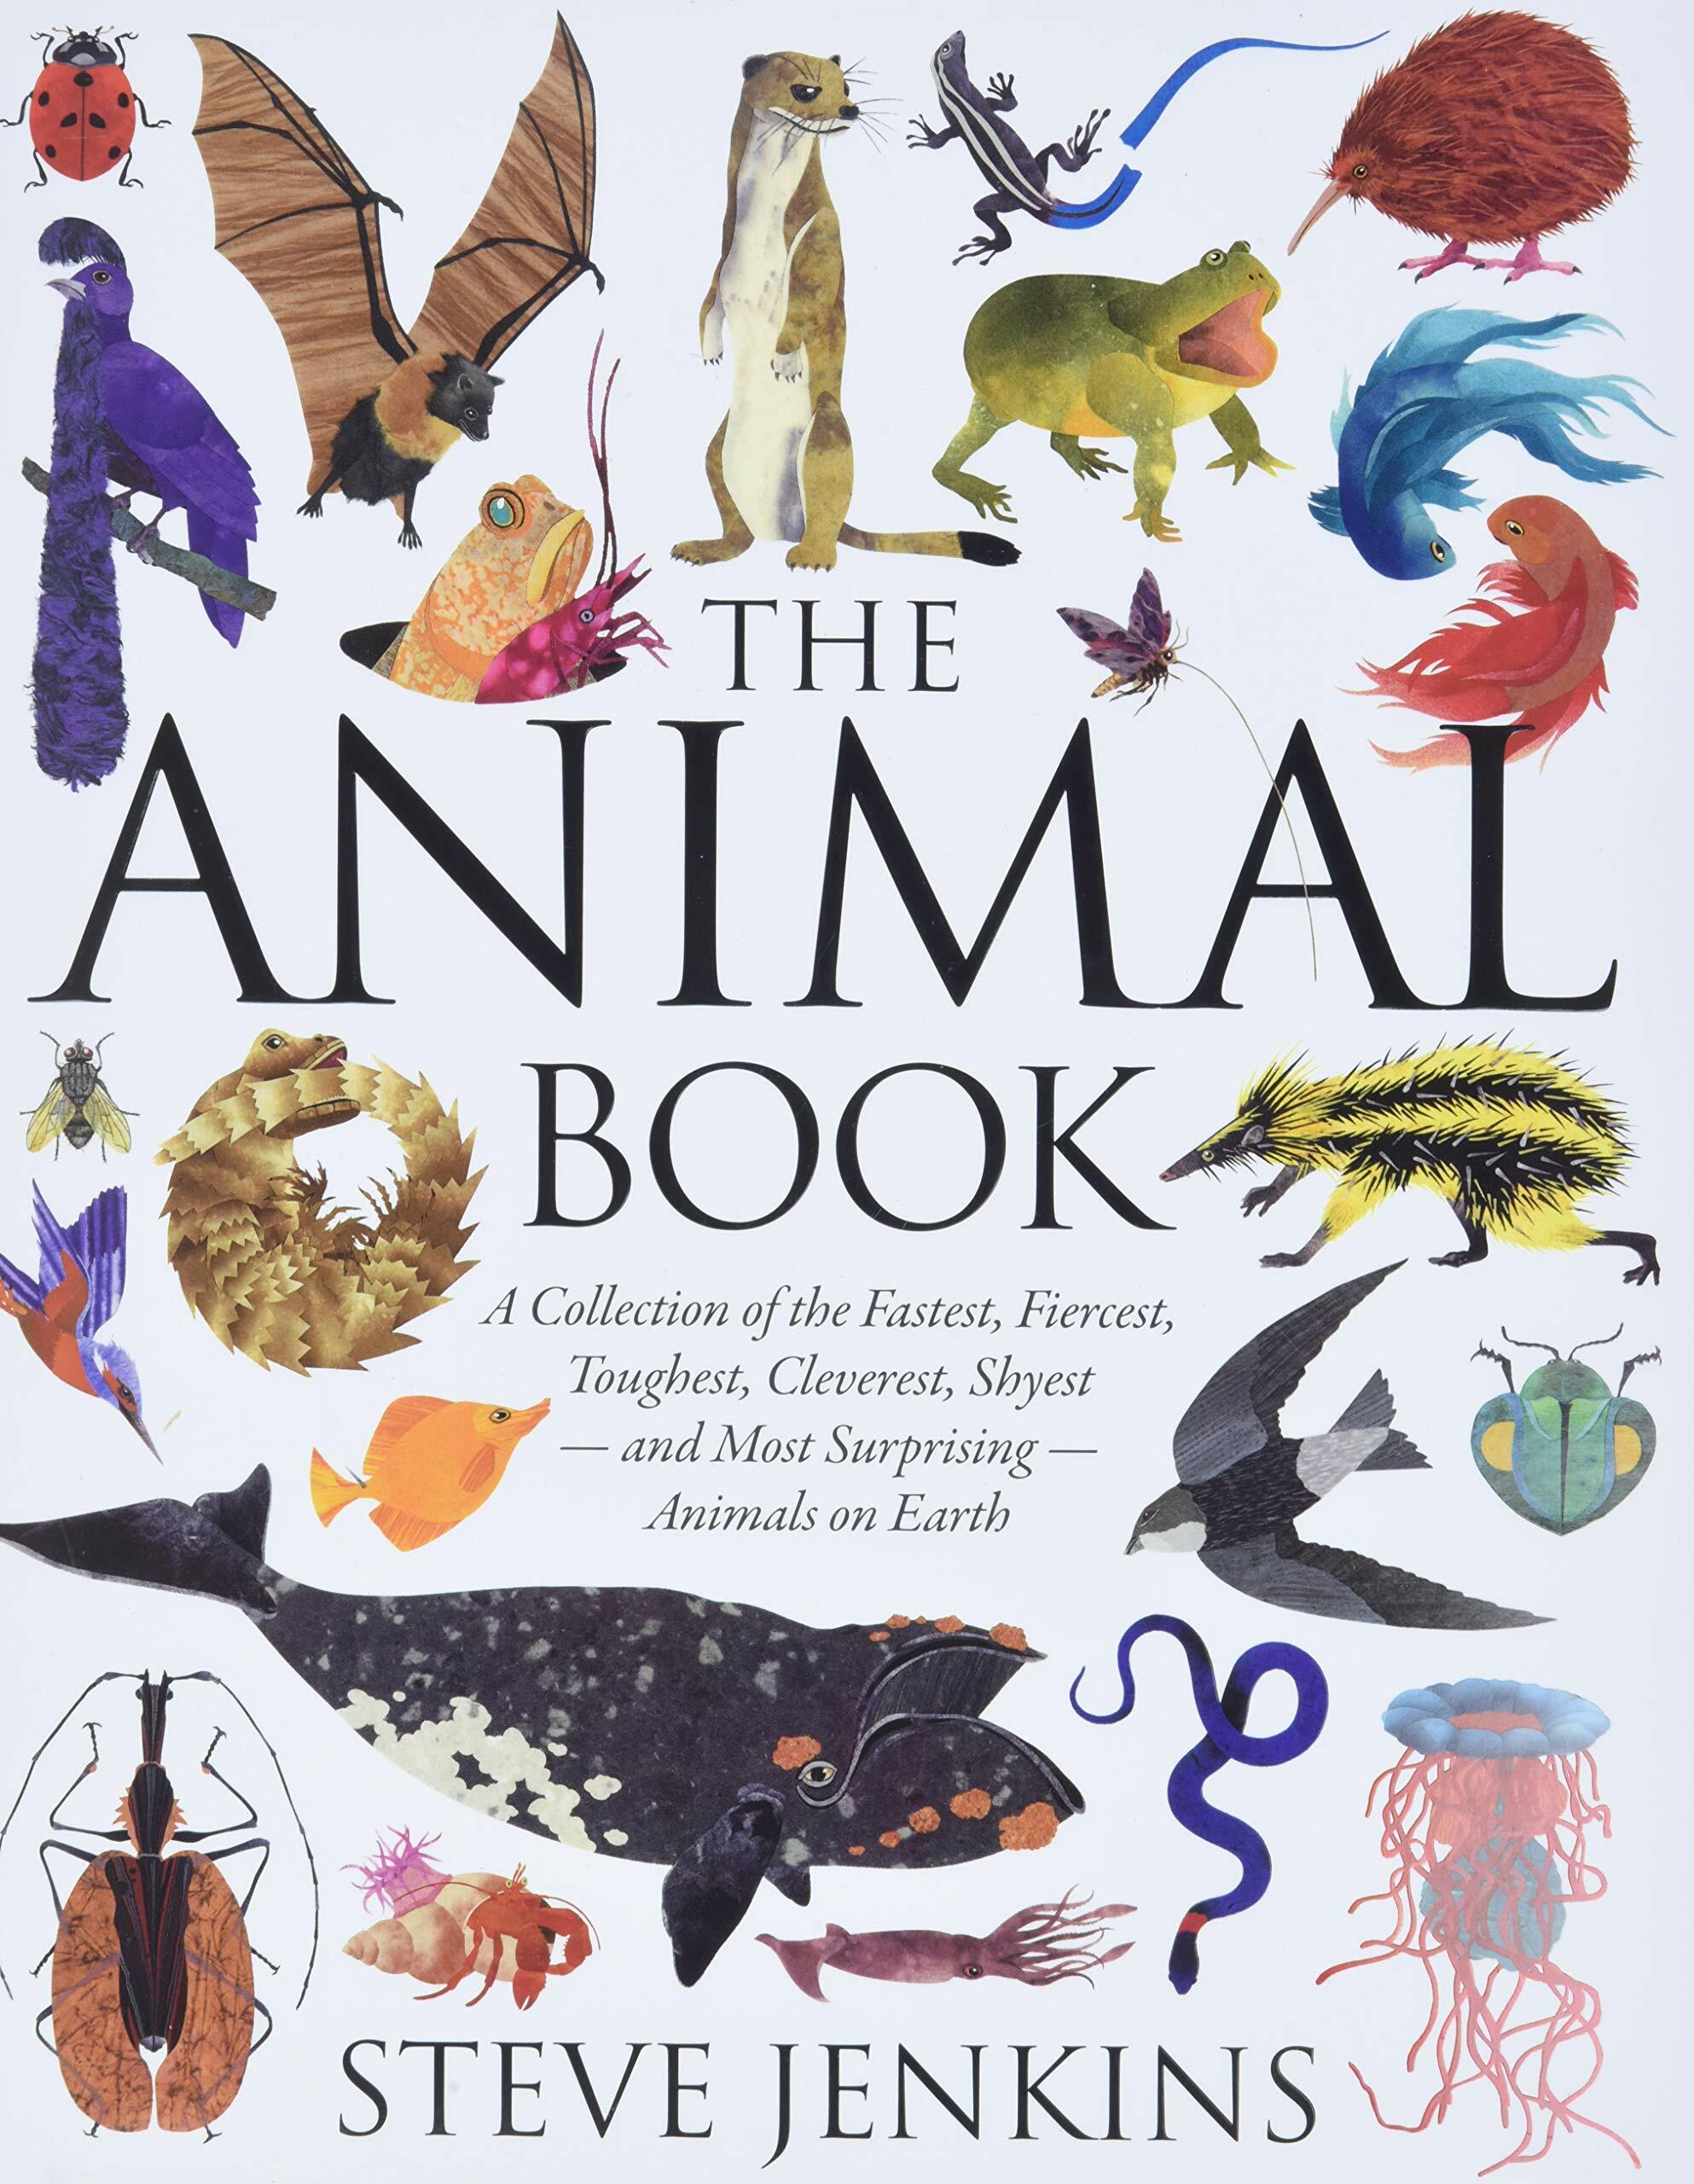 The Animal Book: A Collection of the Fastest, Fiercest, Toughest, Cleverest, Shyest--And Most Surprising--Animals on Earth (Hardcover)